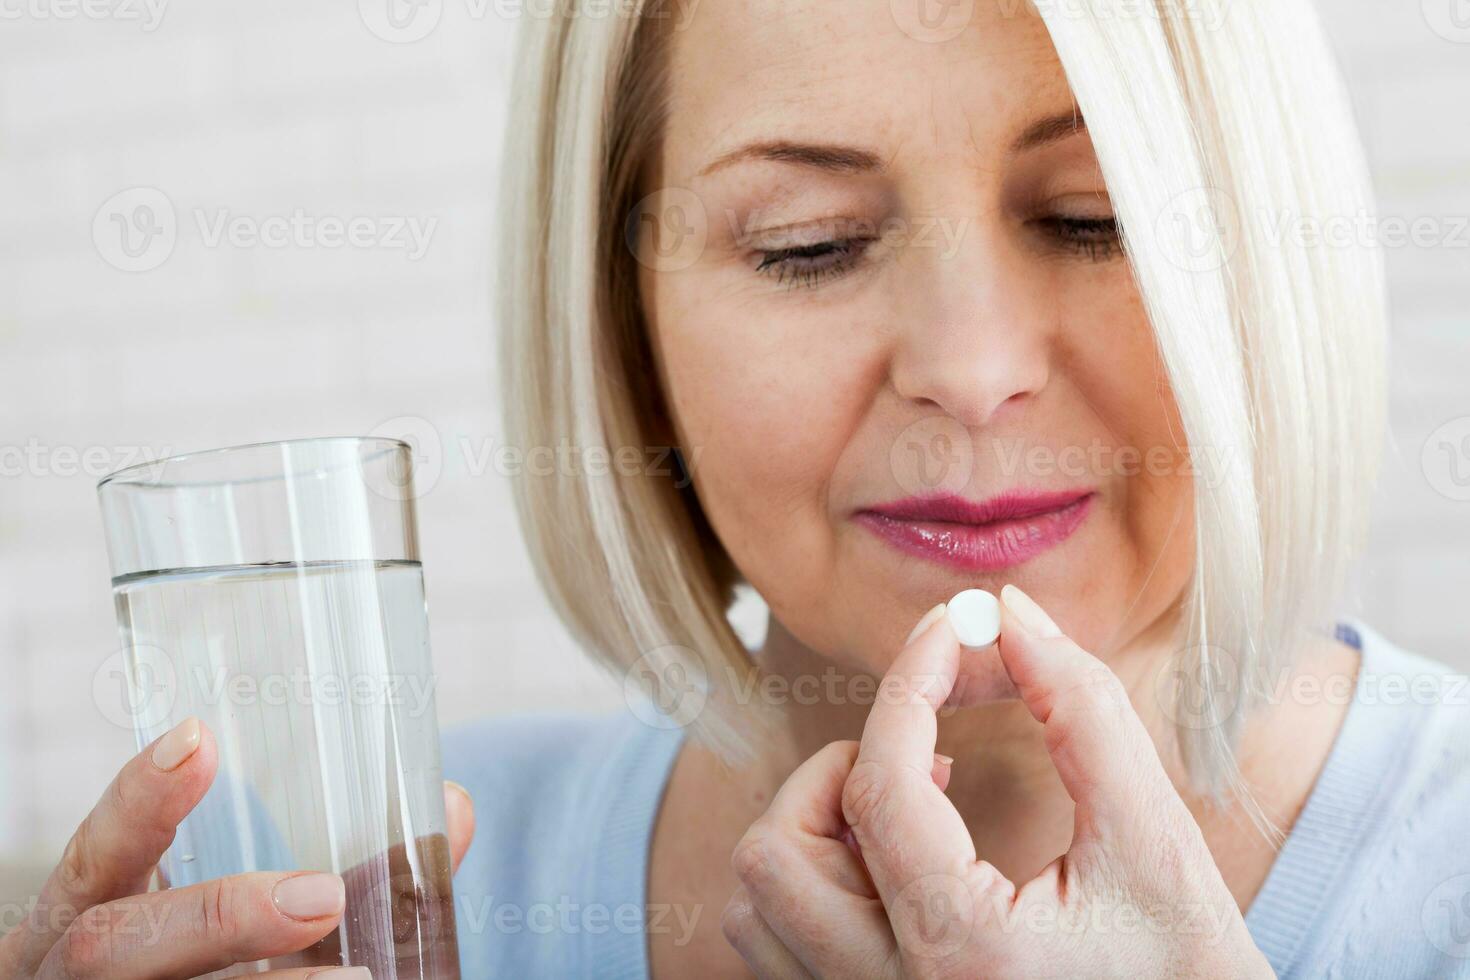 Doubtful sick ill middle woman holding pill and glass of water taking painkiller medicine drugs to relieve headache pain, worried about side effects of antidepressant or emergency contraceptive meds photo